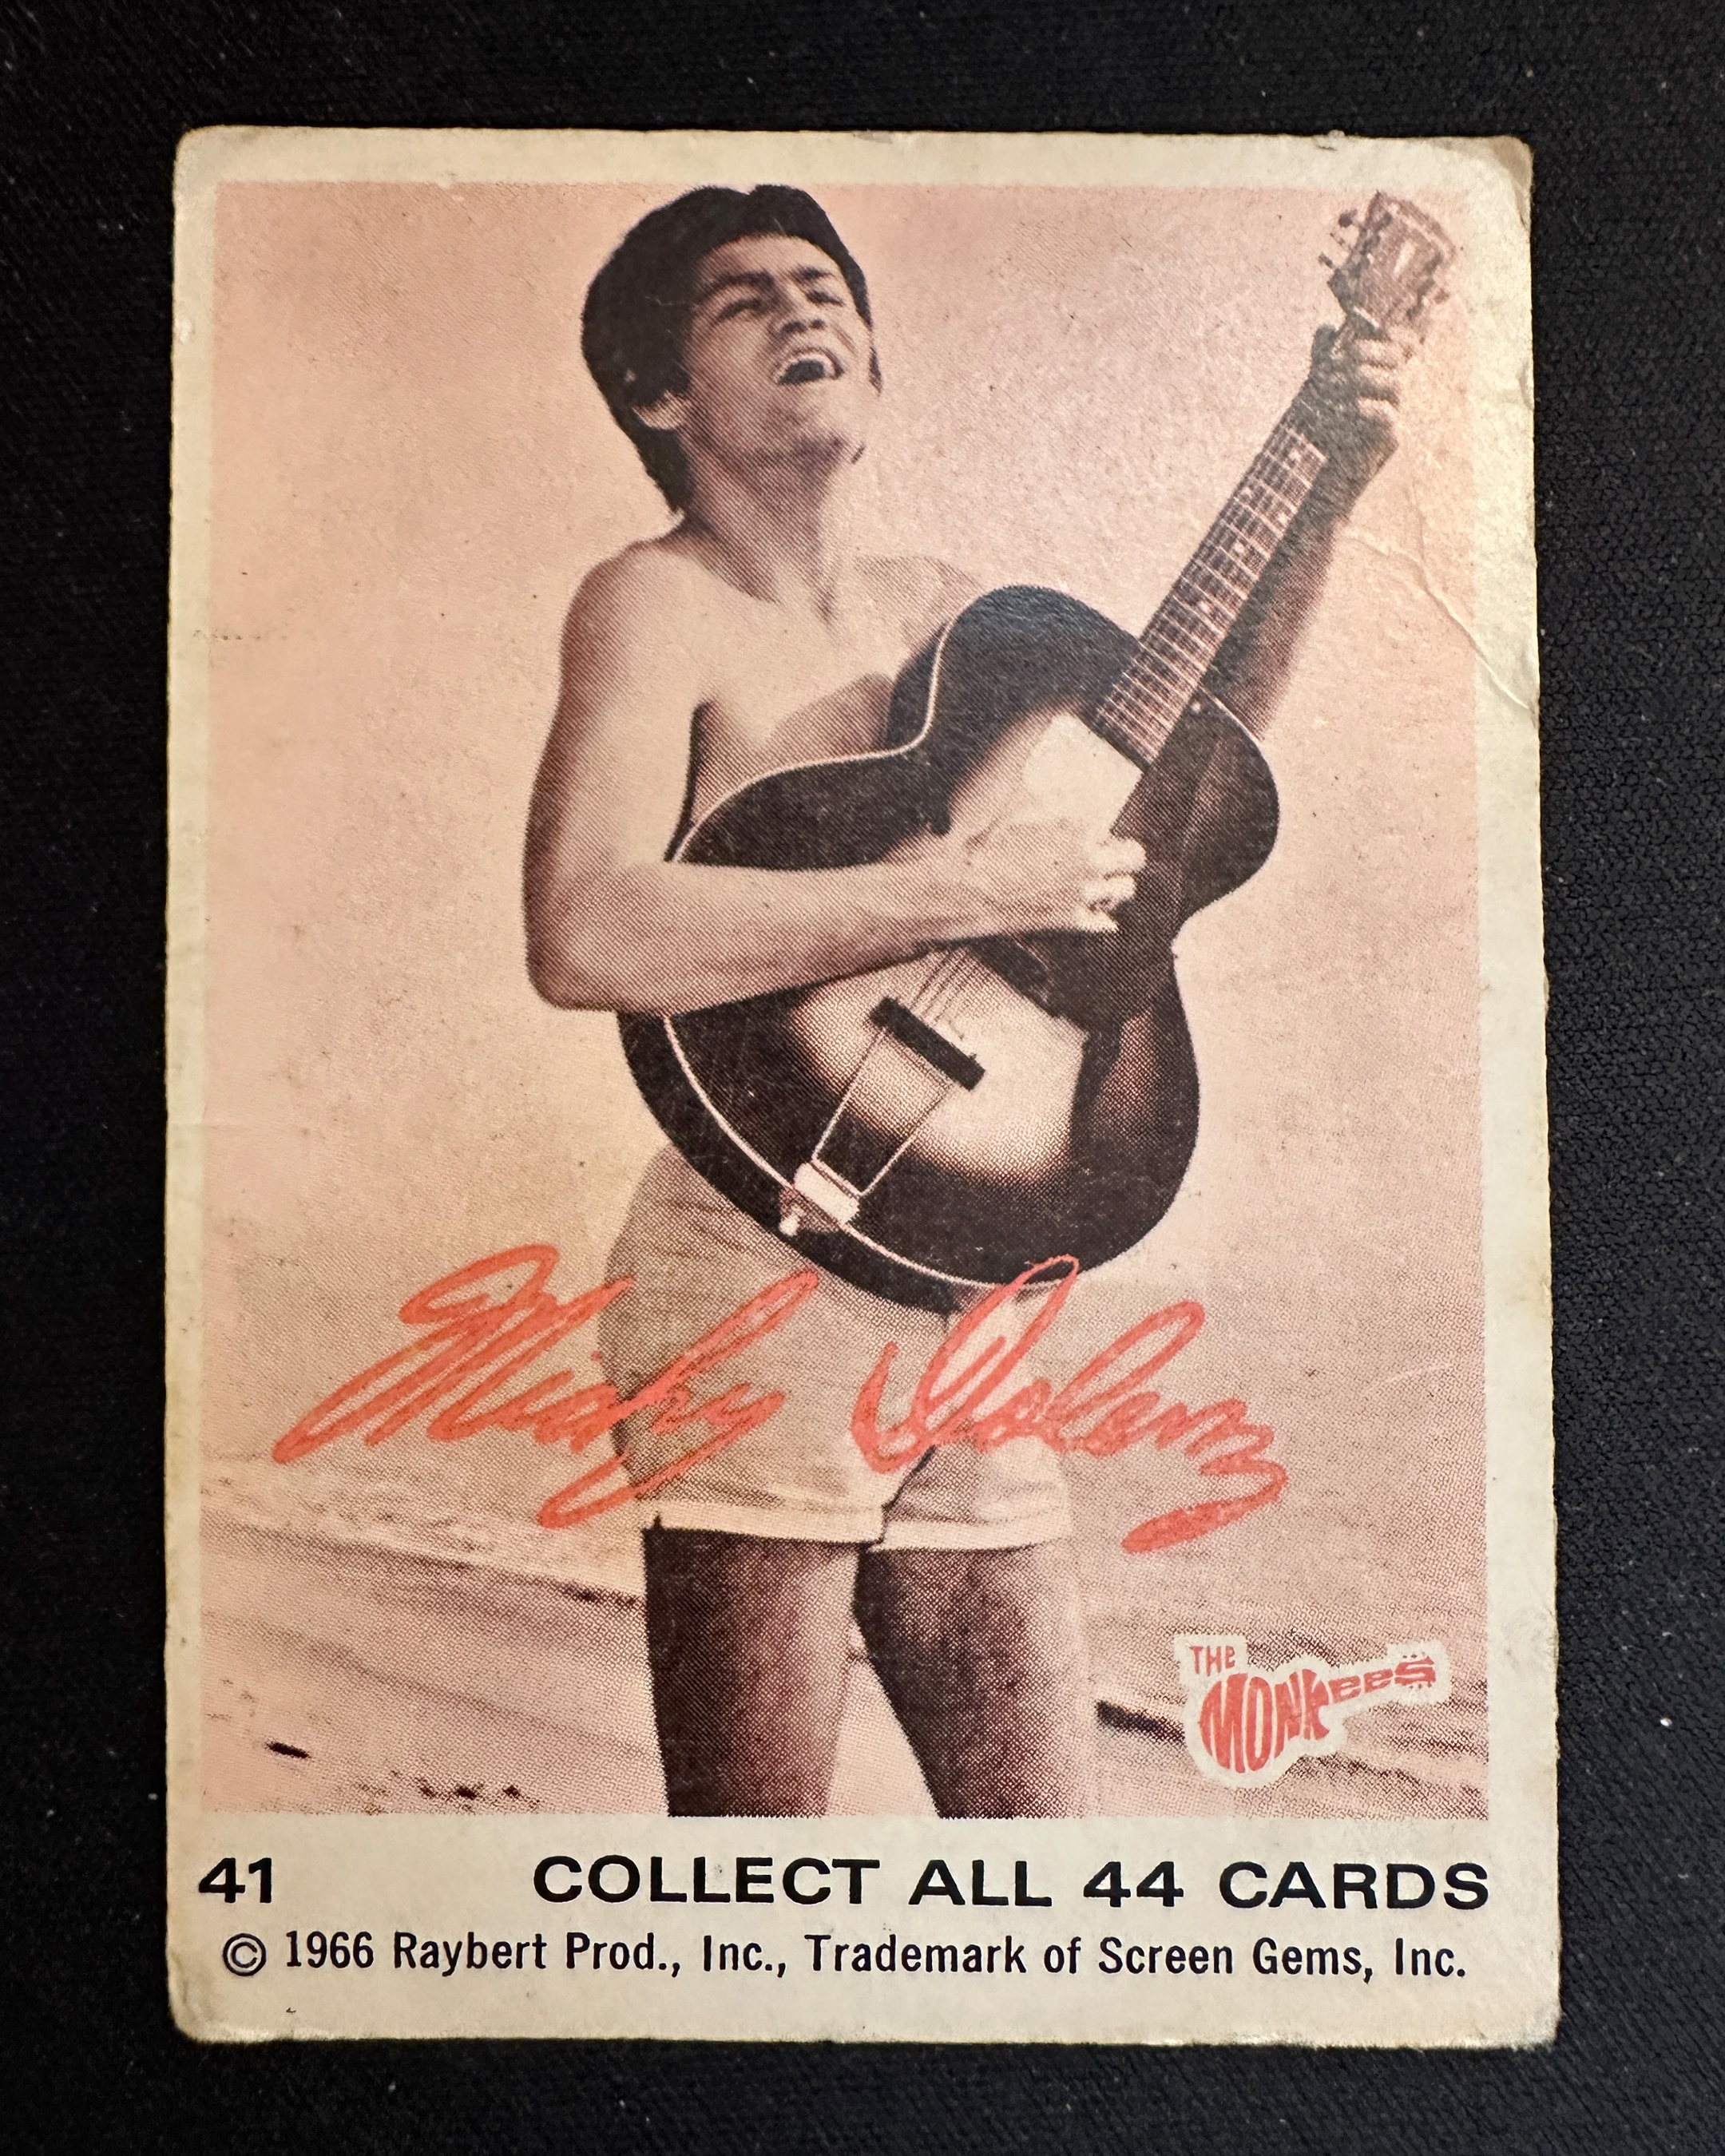 A vintage card of Micky Dolenz playing the guitar